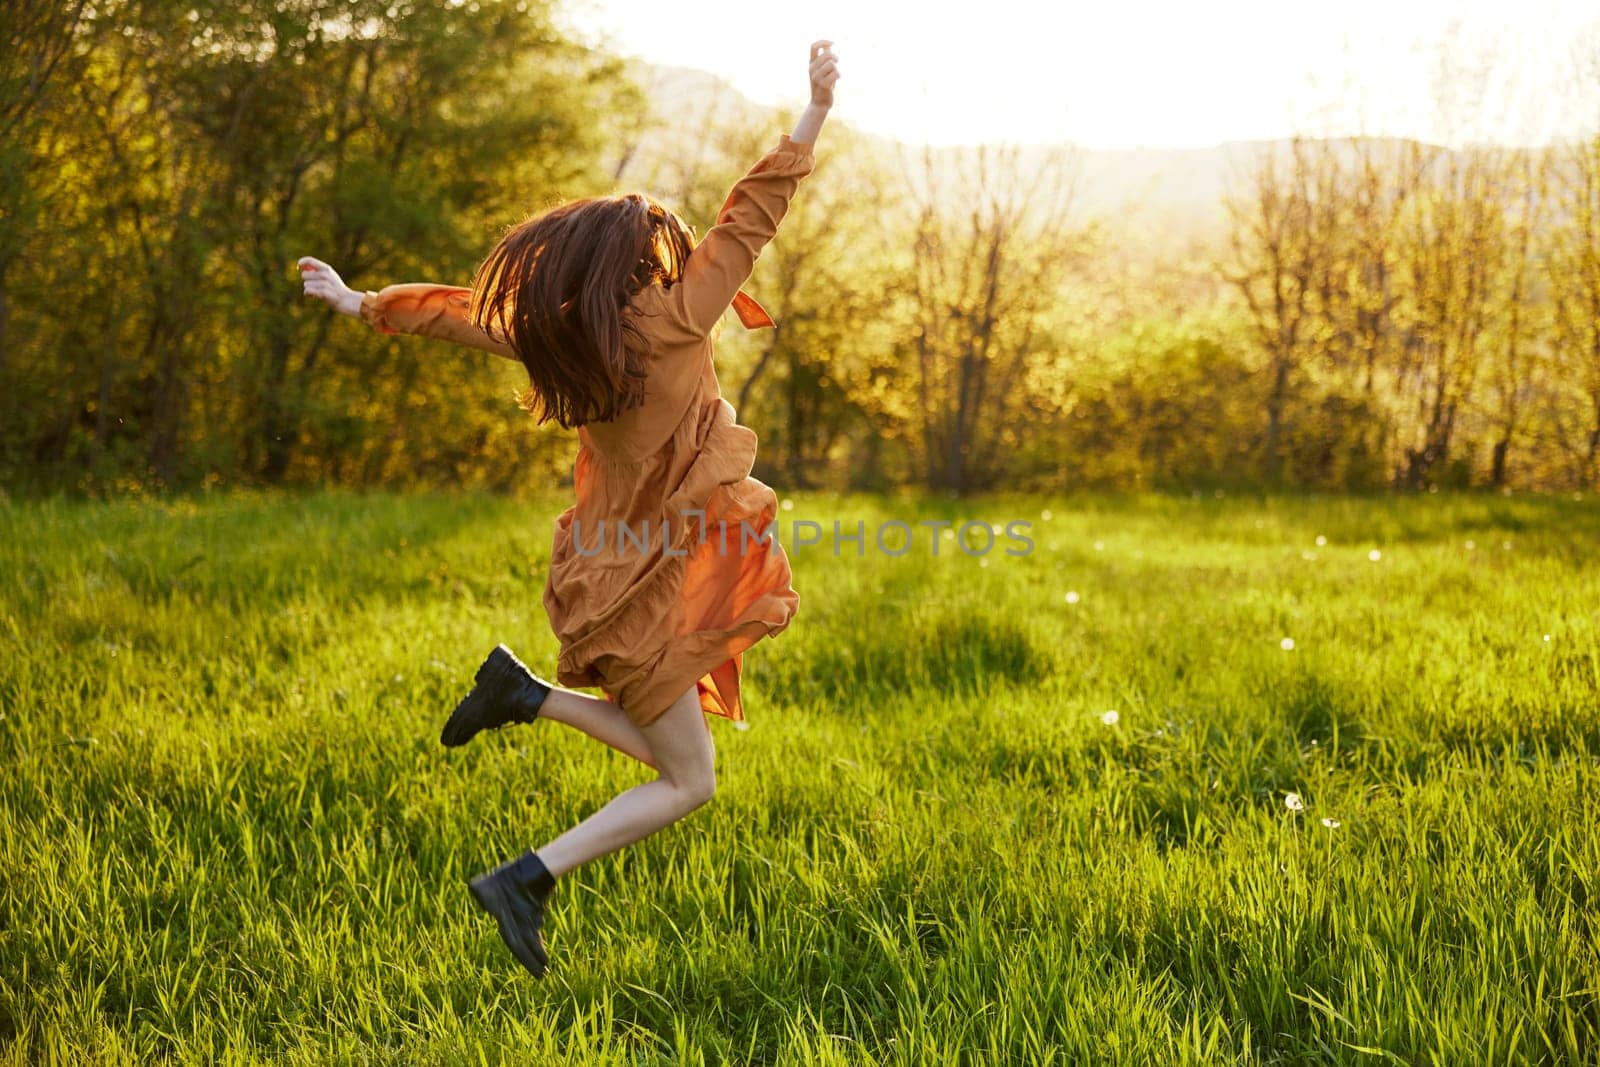 a happy woman in an orange dress illuminated by the rays of the setting sun happily jumps in a green field in the park, enjoying nature and a warm summer day. Horizontal photo. High quality photo